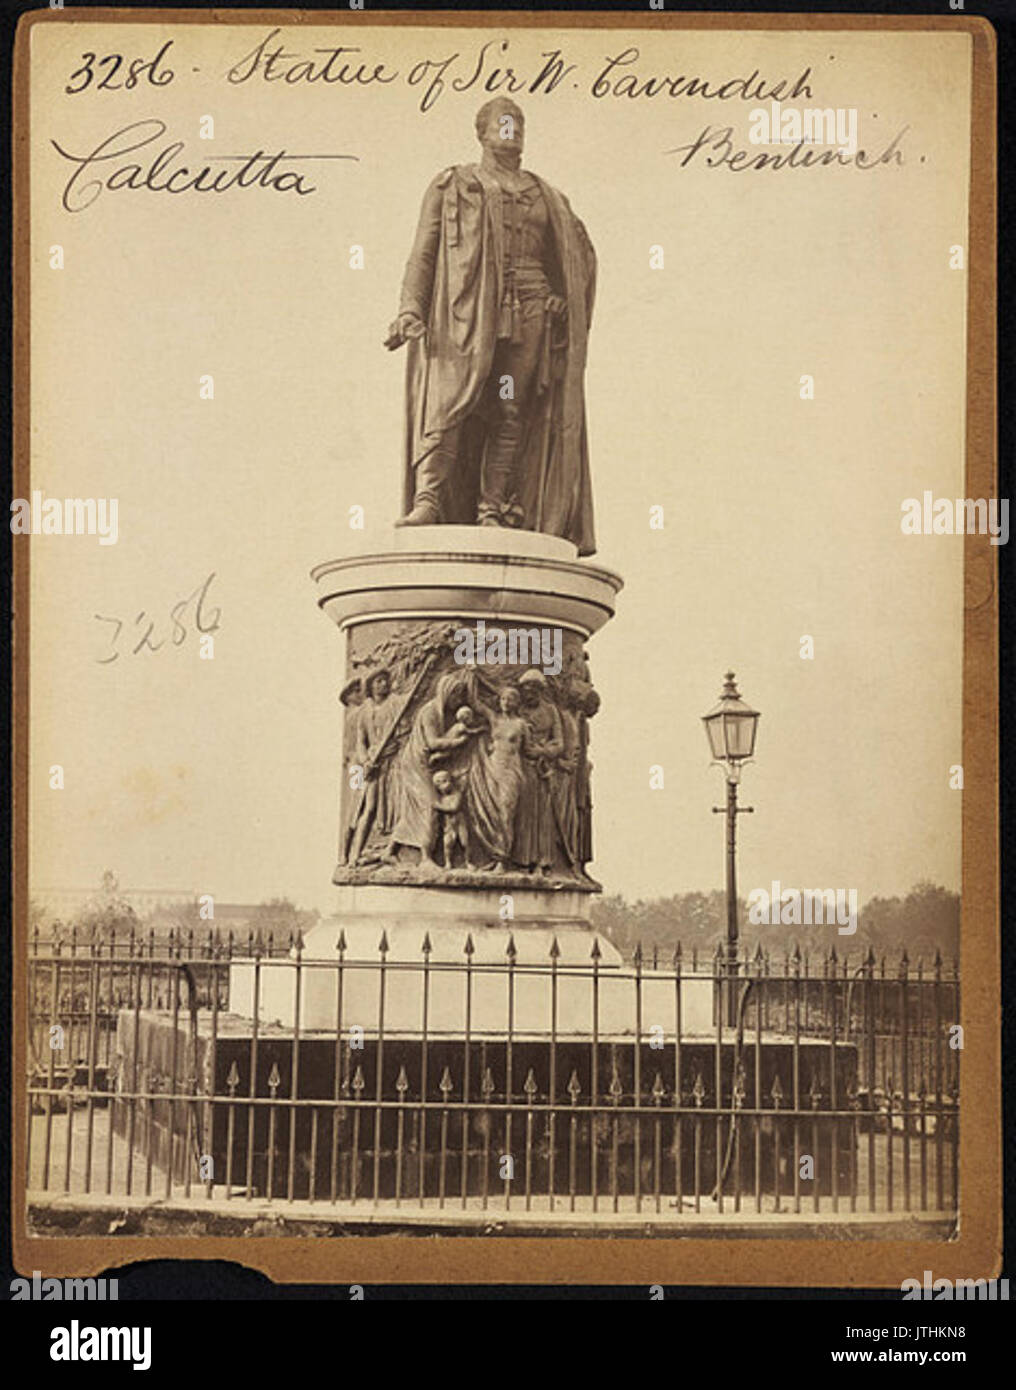 Statue of Sir W. Cavendish Bentinck in Calcutta by Francis Frith Stock Photo